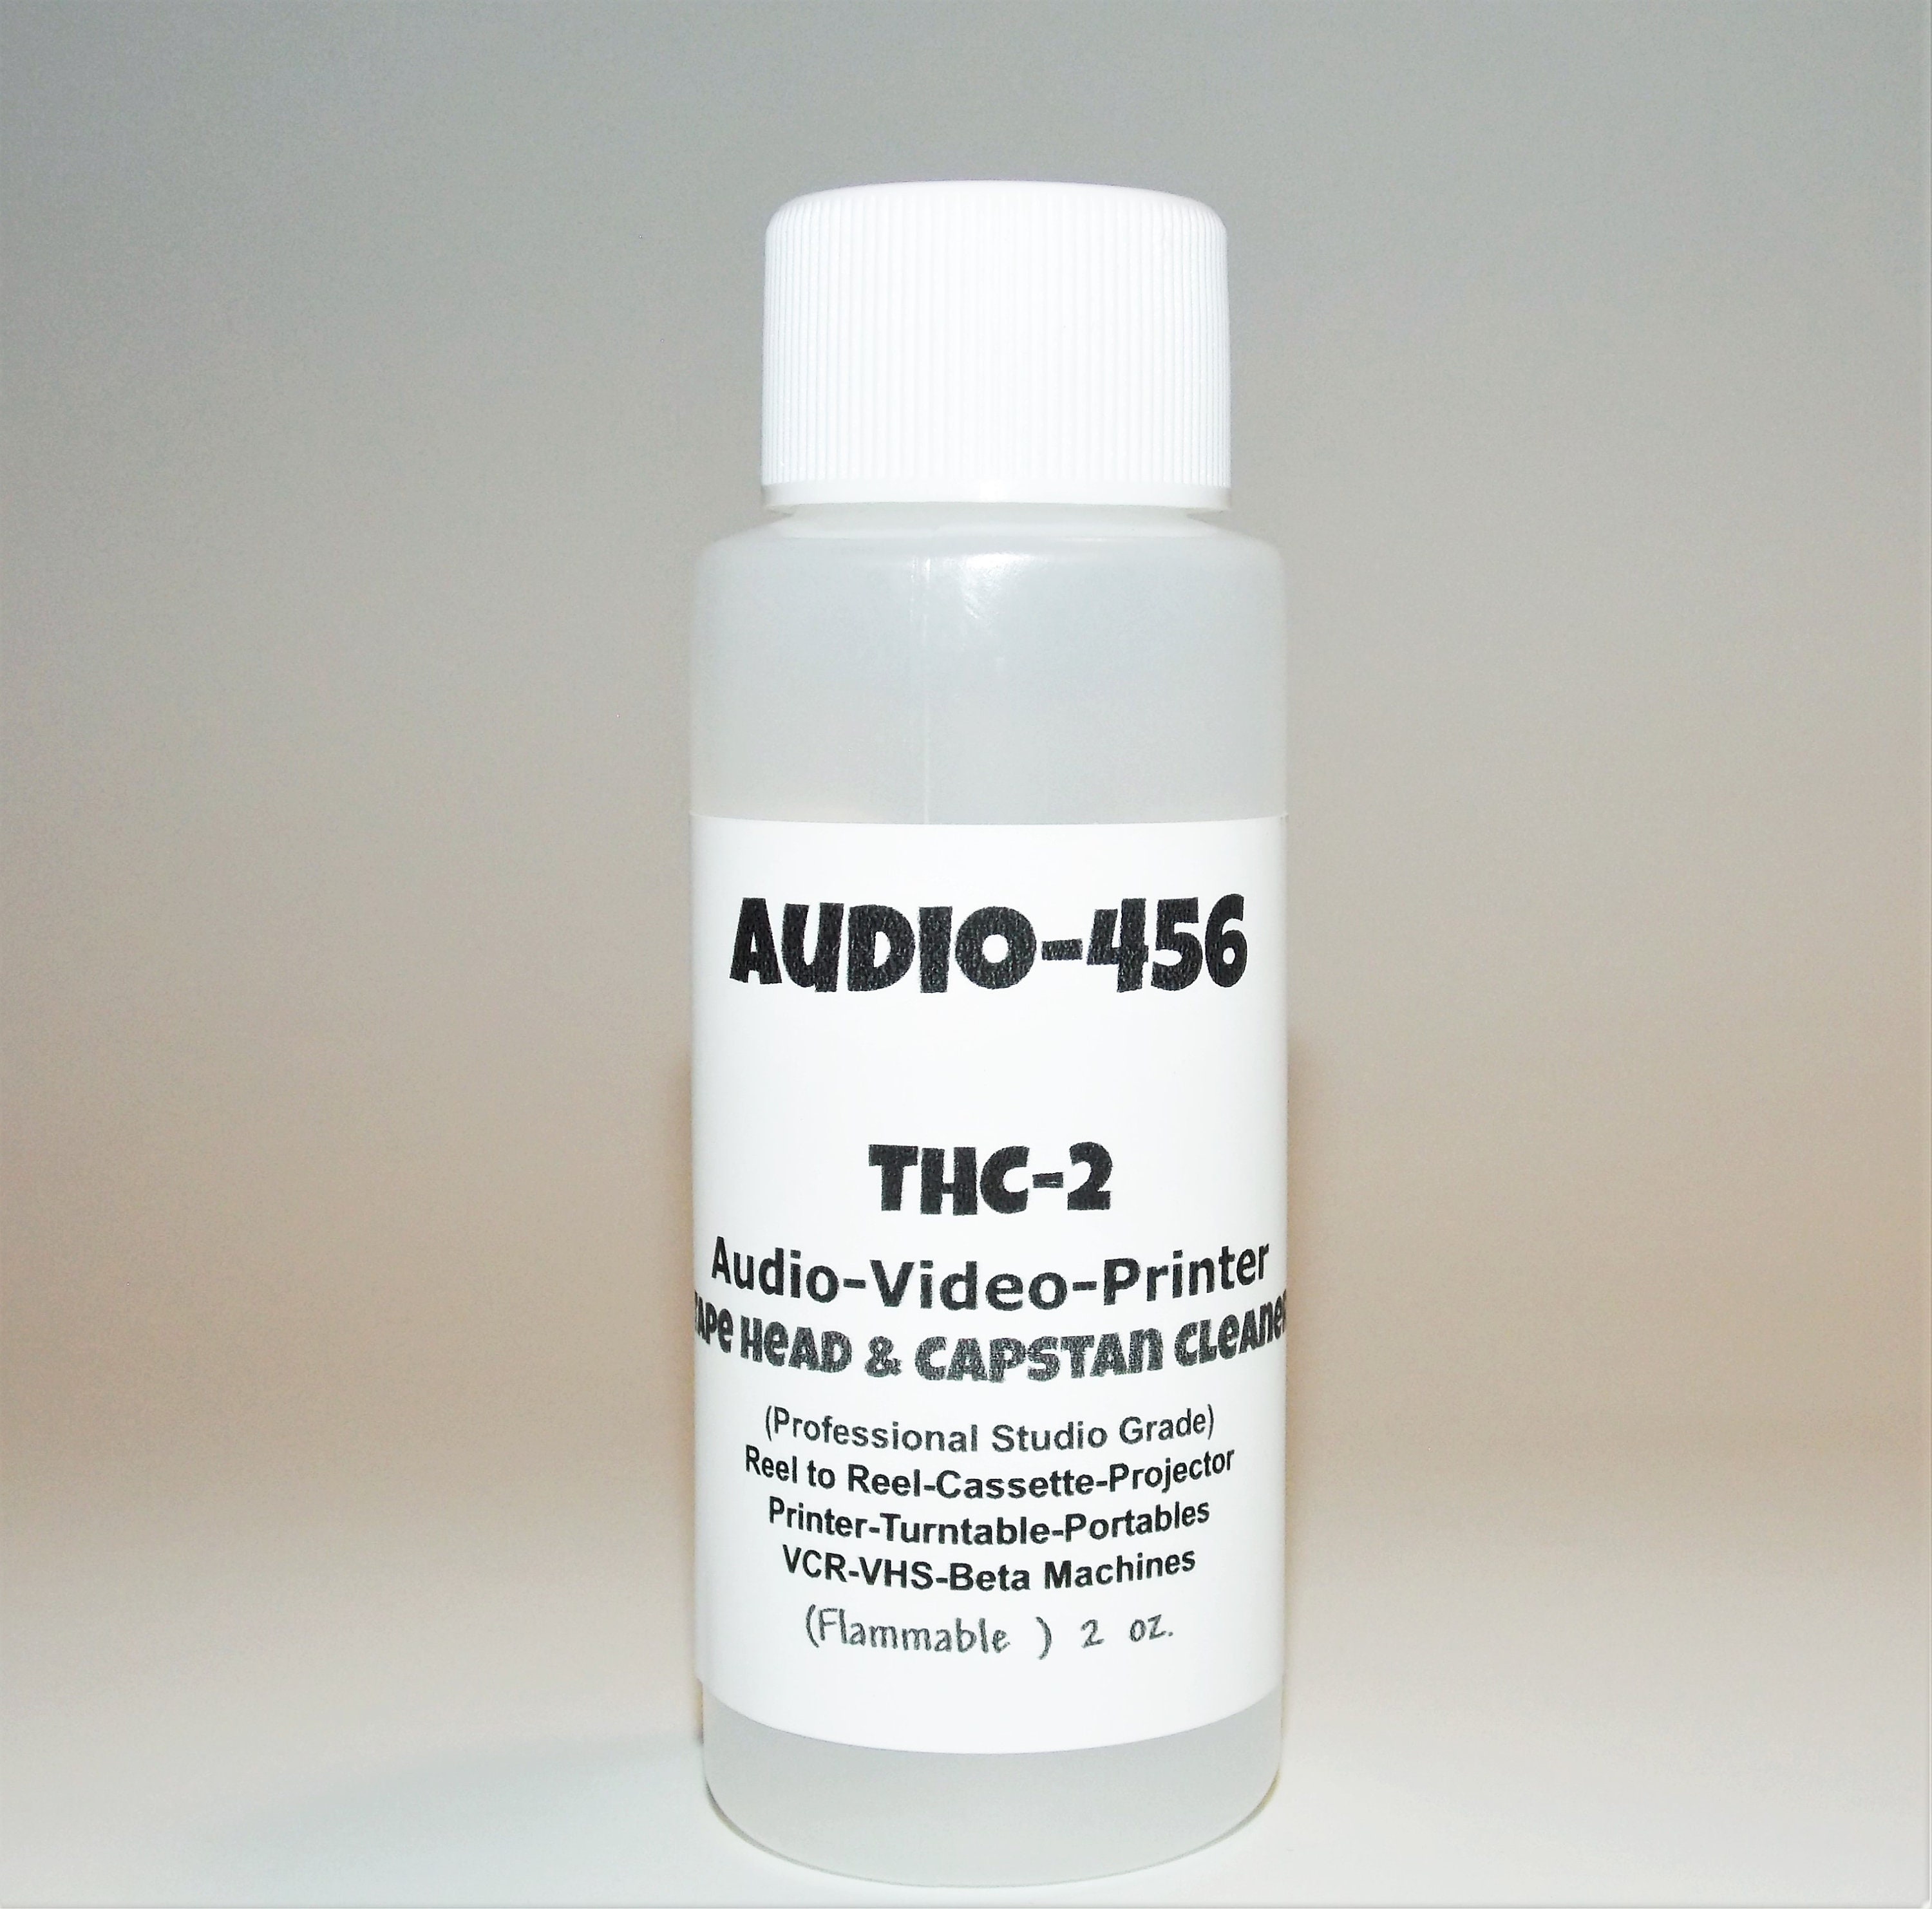 Audio 456 THC-2 -2oz Tape Head & Capstan Cleaner for Reel to  Reel,Cassette,Tape Echo,VCR,Beta ,Movie Projectors ect ect (formerly  SR-Audio)